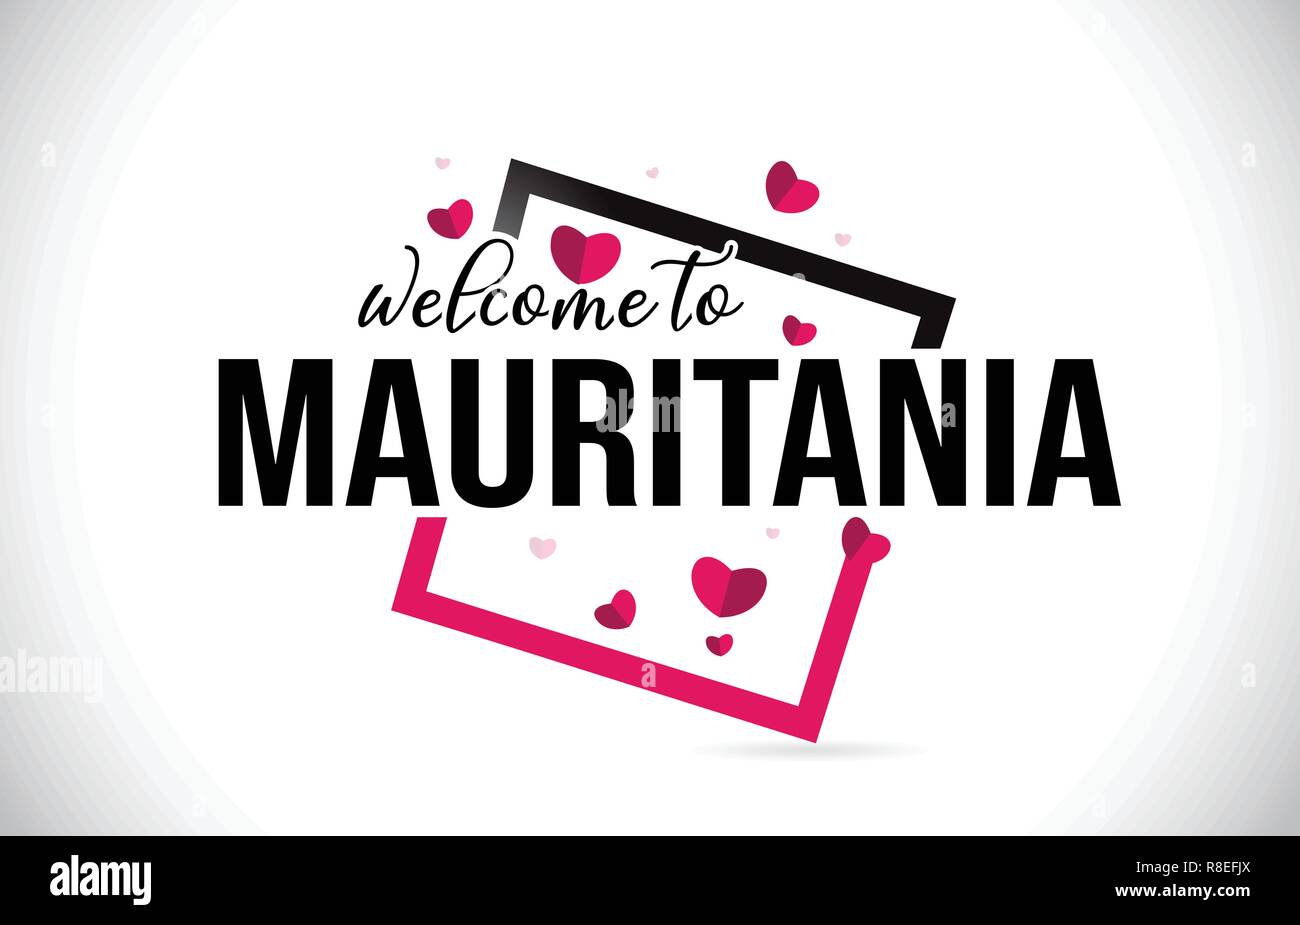 Mauritania Welcome To Word Text with Handwritten Font and  Red Hearts Square Design Illustration Vector. Stock Vector